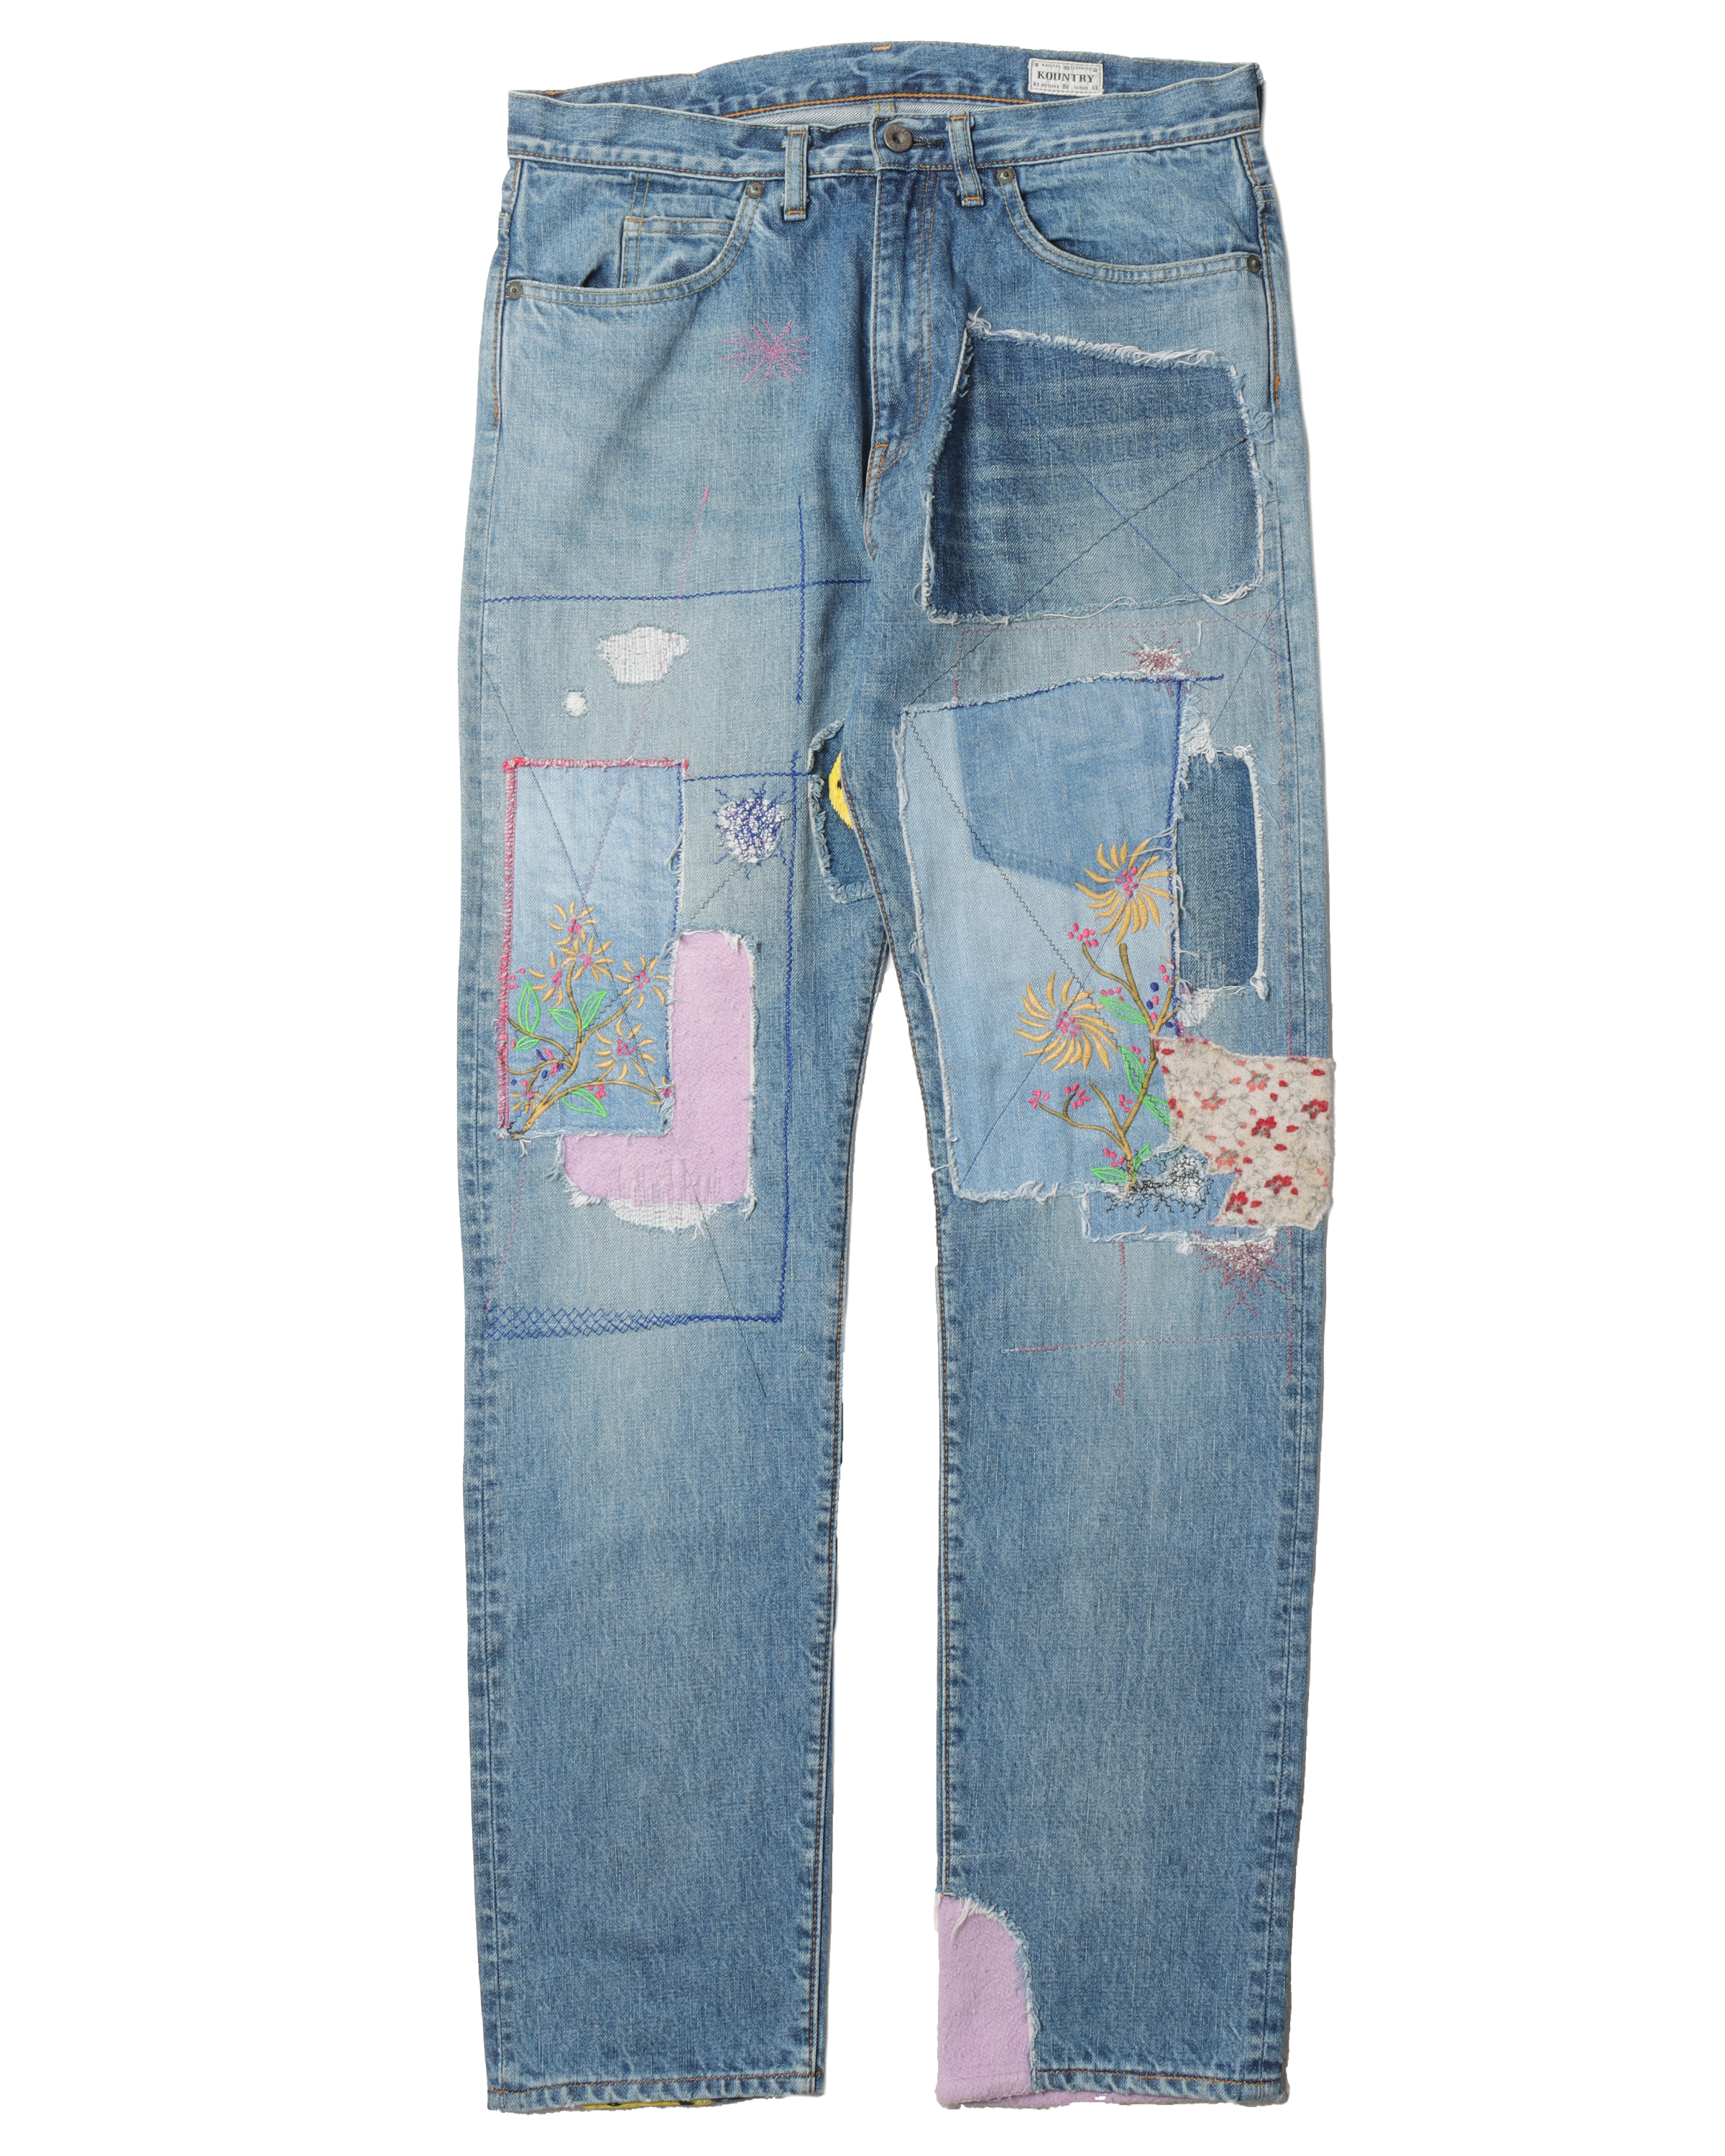 Smiley Patch Jeans